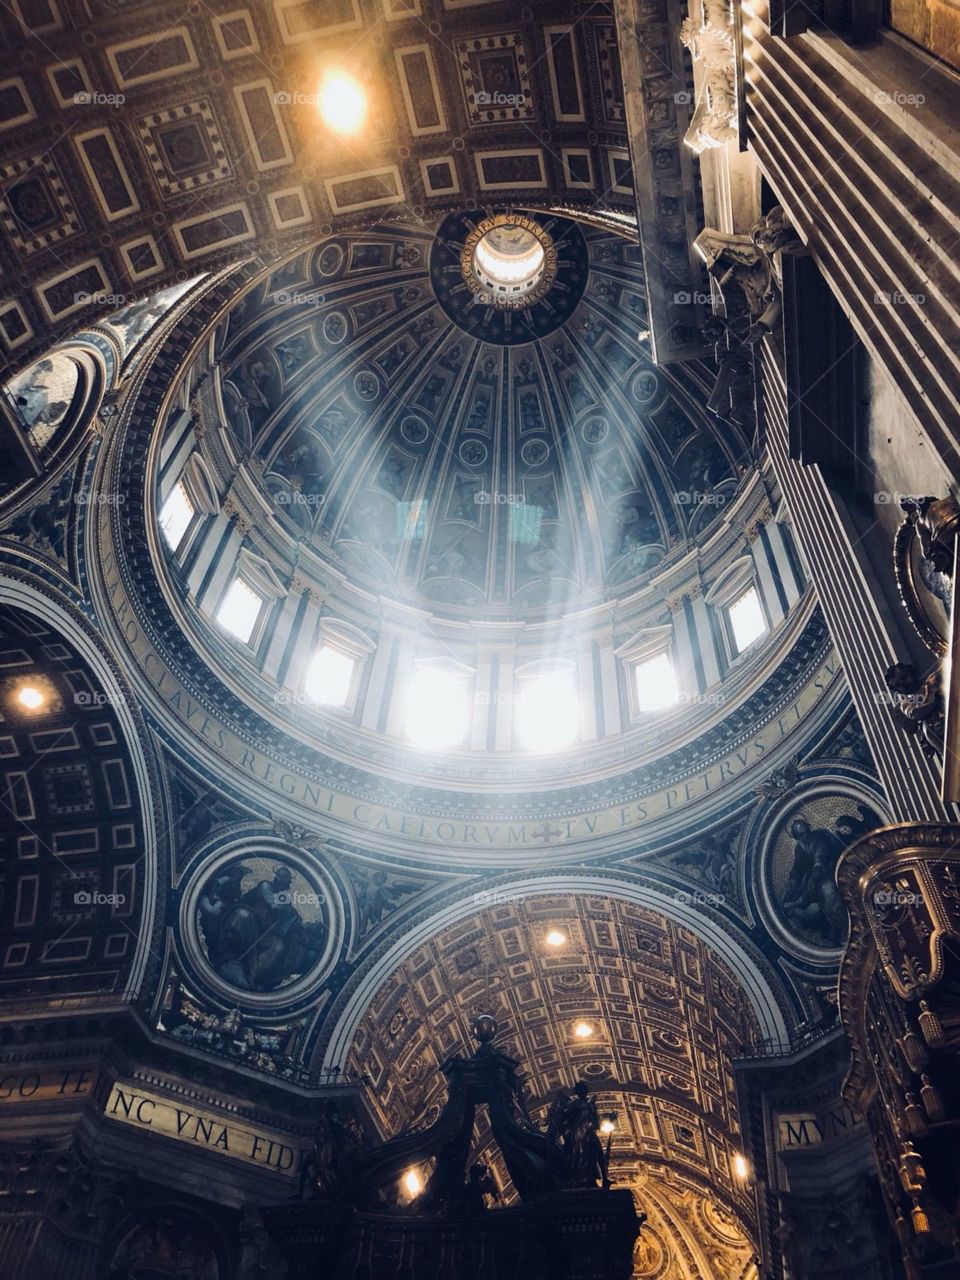 A picture of the dome of the St. Peter in Vatican City. It's built between 1506 and 1626. Michelangelo made the dome a little smaller than the dome of the pantheon. They say he did it on purpose, because he had respect for the builder of the pantheon